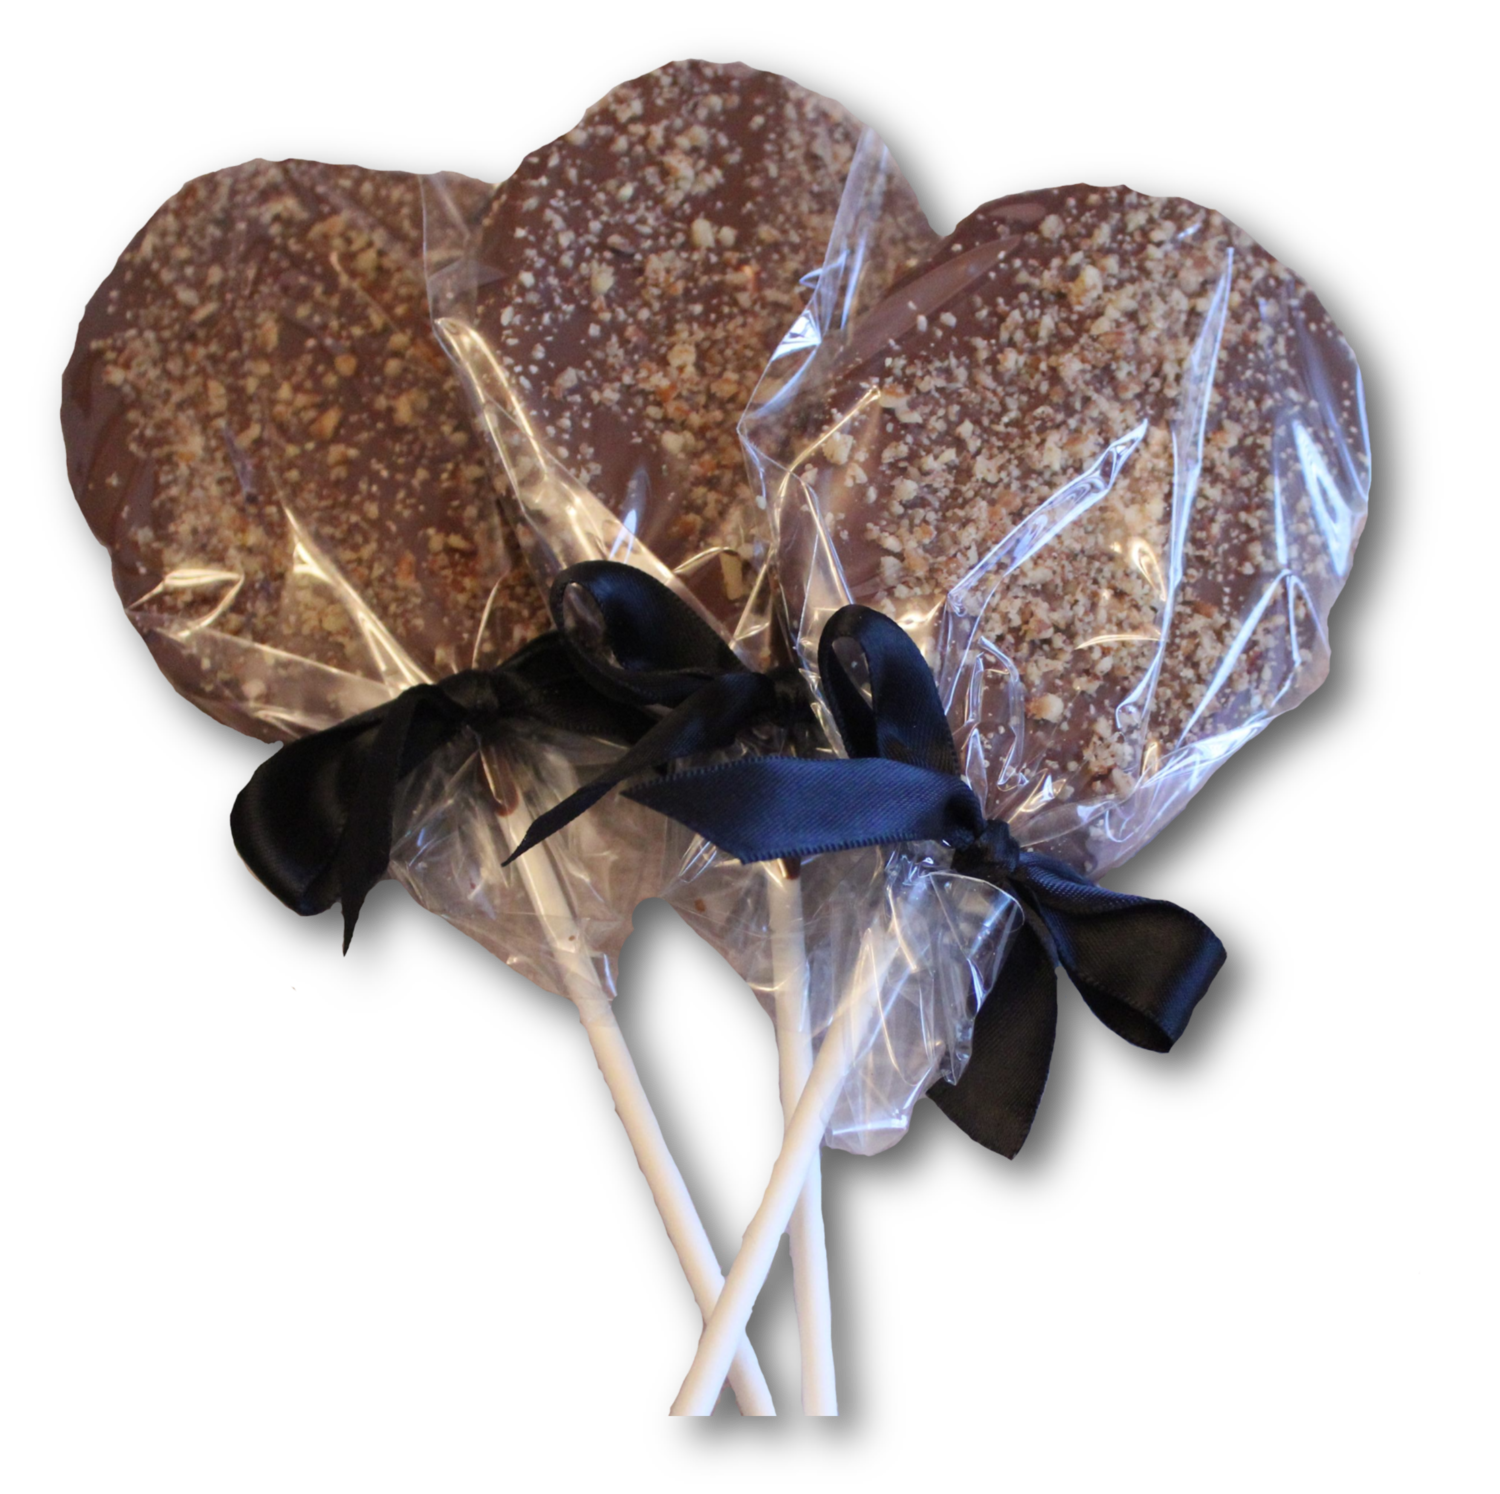 Toffee Pops